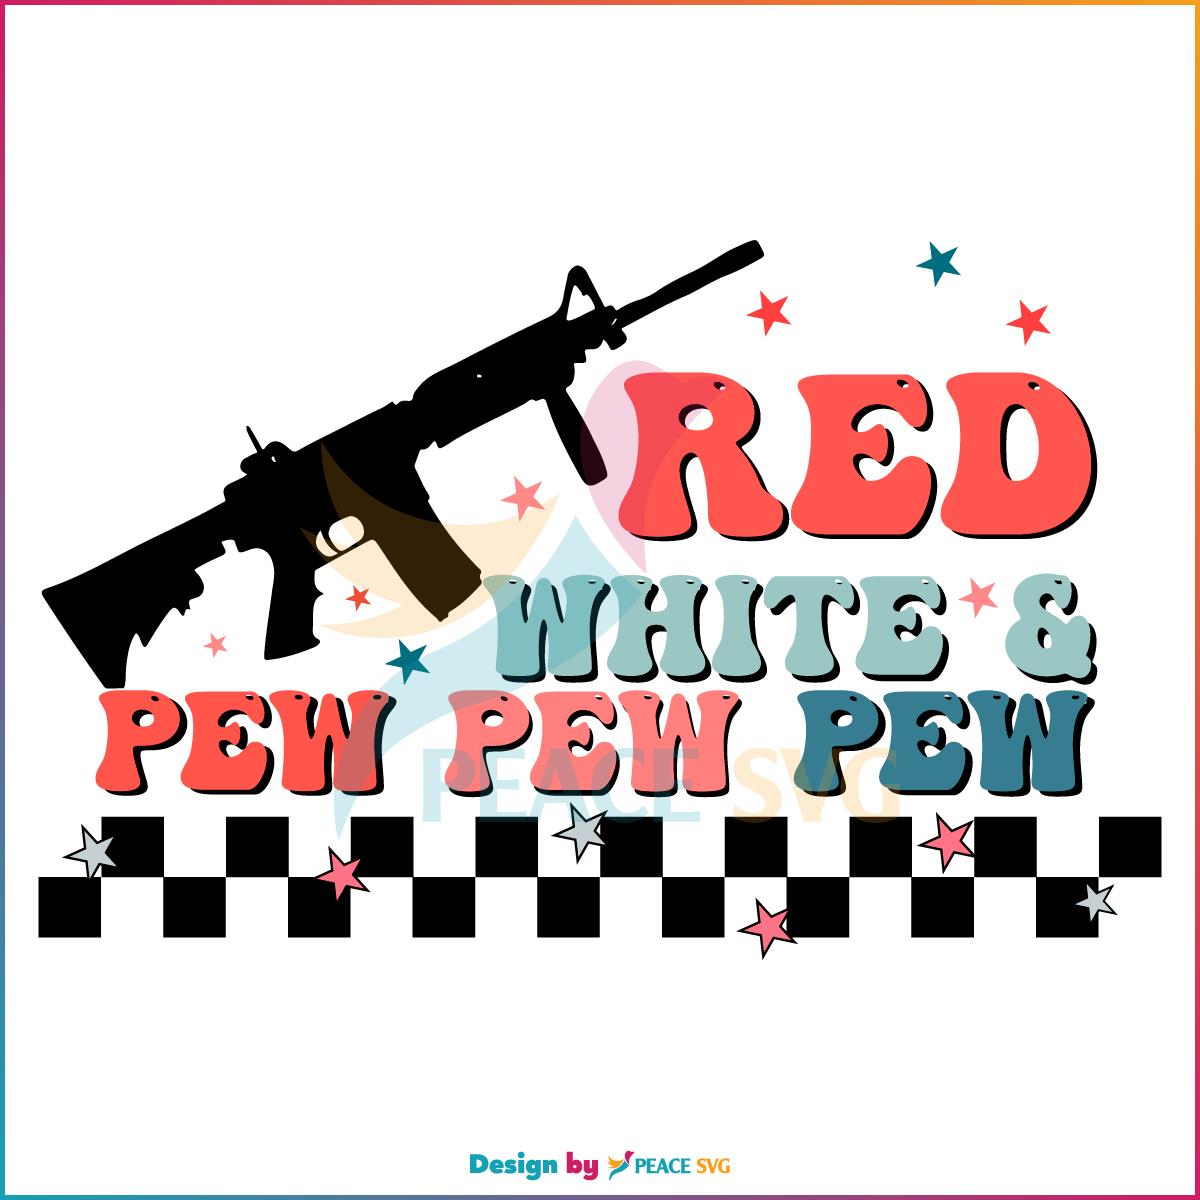 red-white-and-pew-pew-pew-independence-day-svg-cutting-file